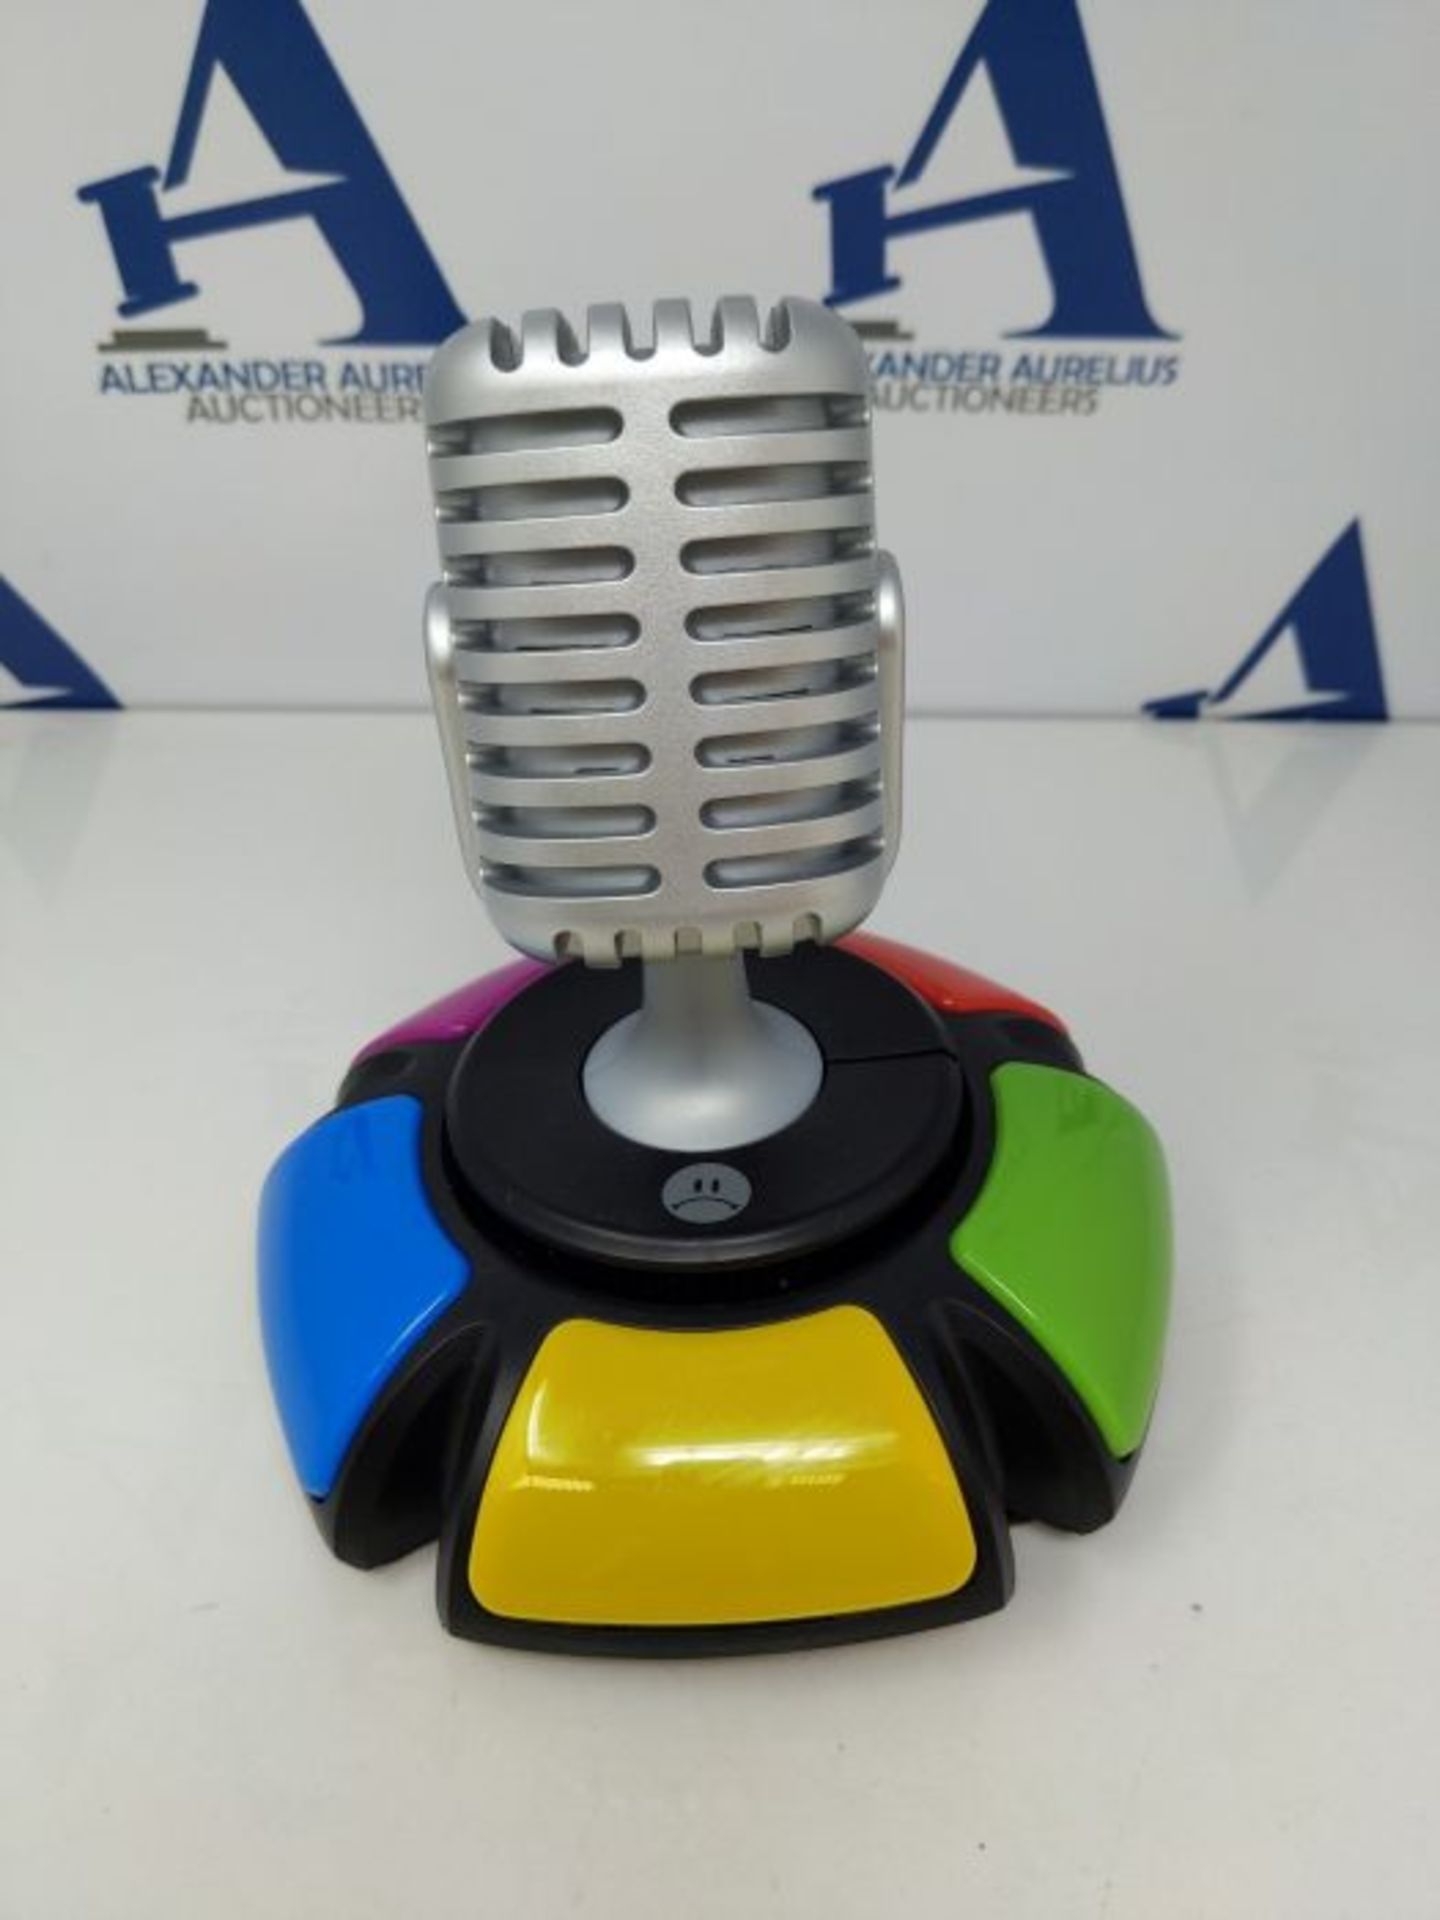 HUTTER Trade 061829 Sound Jack Acoustic Quiz Game, Multi-Colour - Image 2 of 2